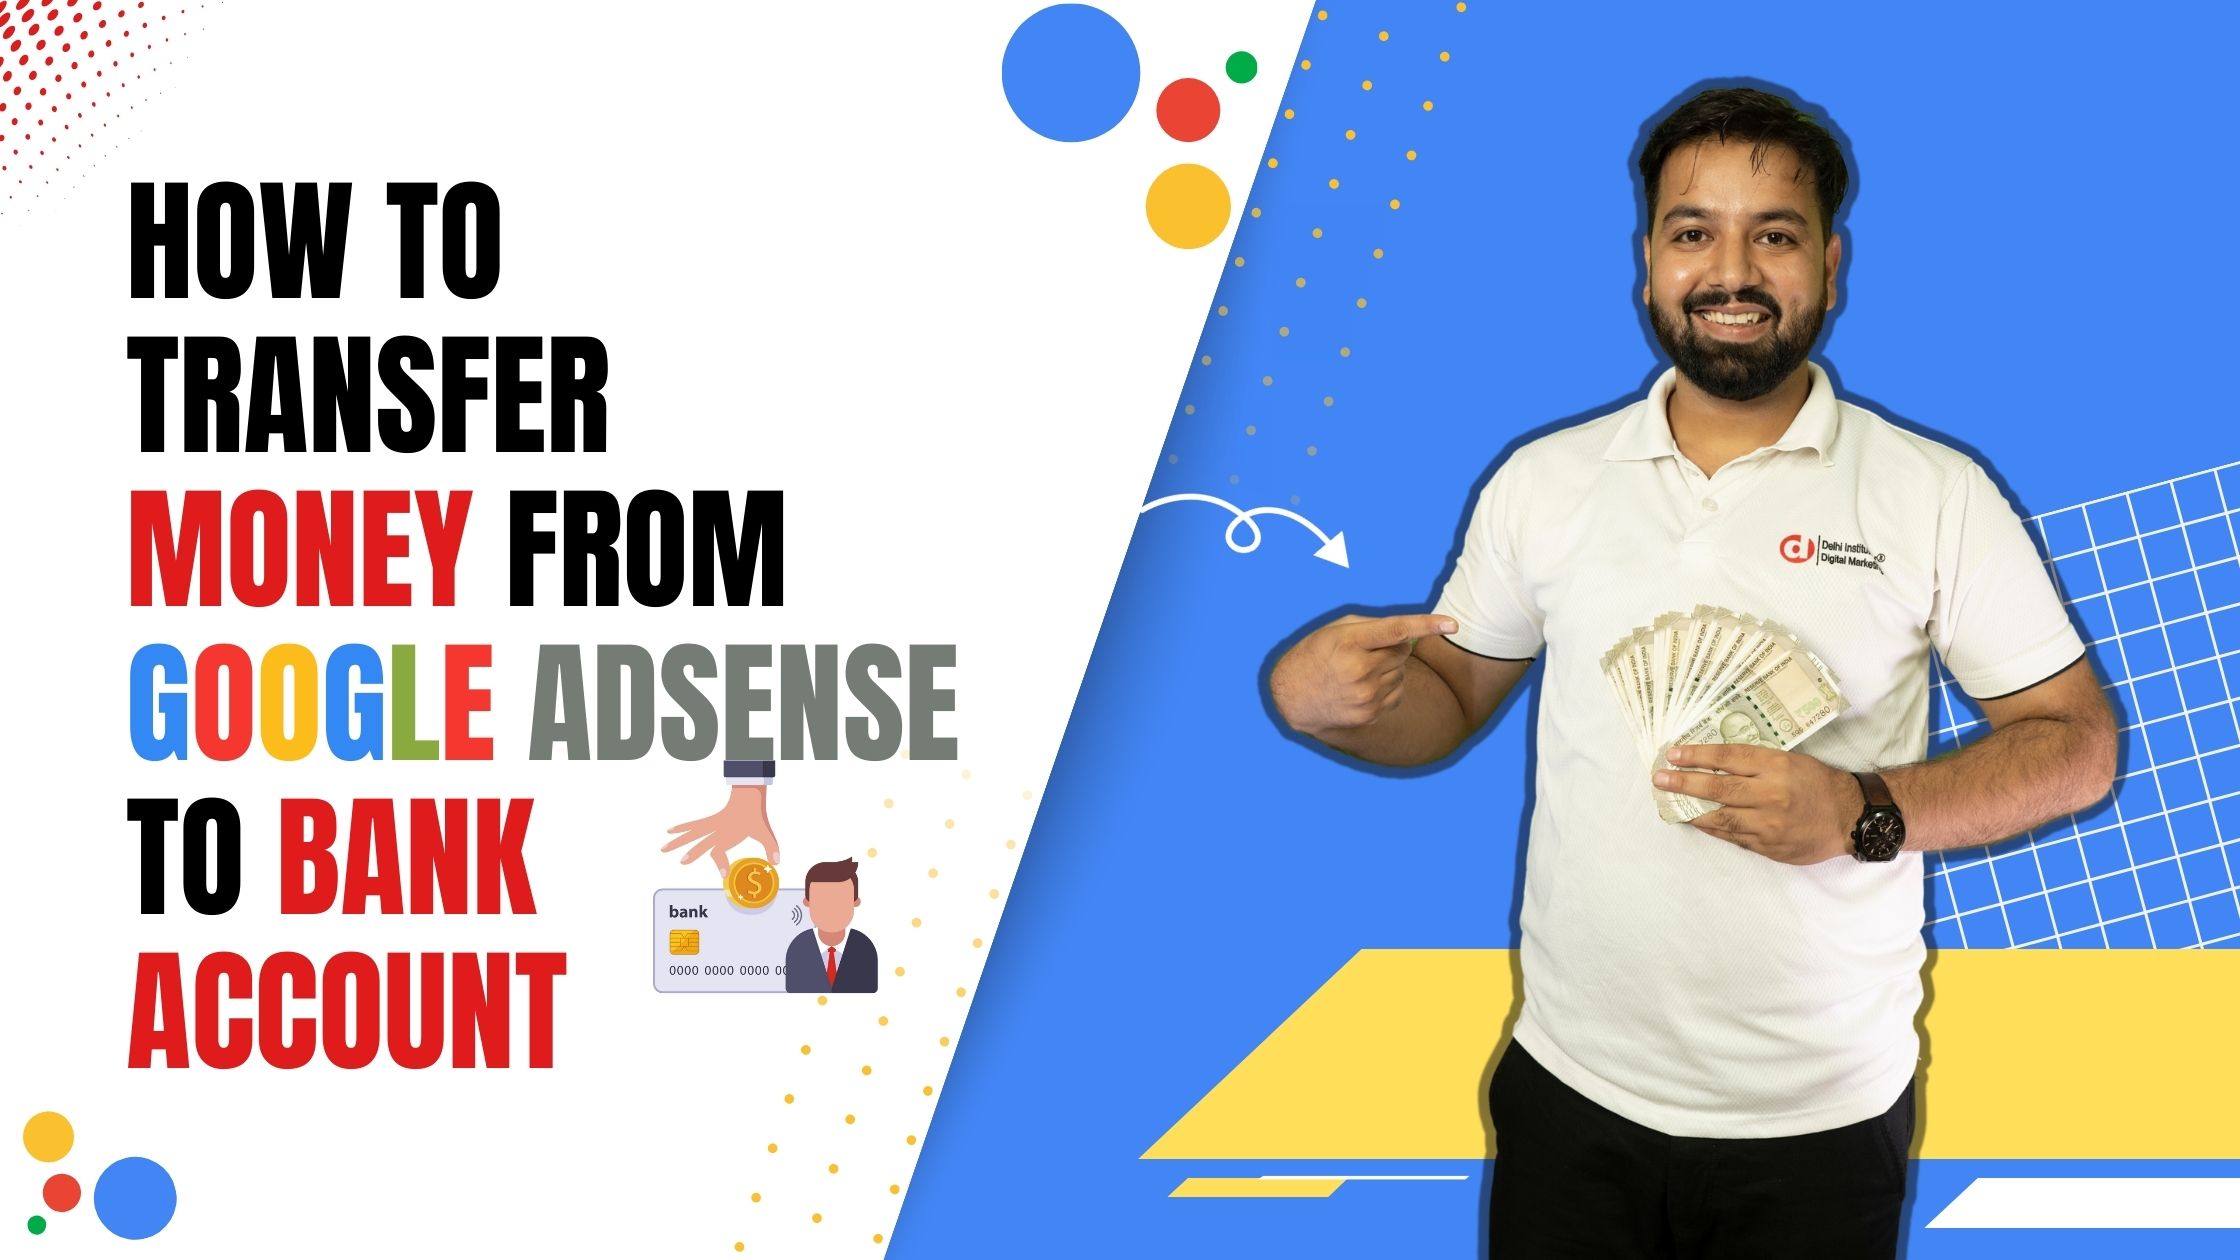 How to Transfer Money from Google Adsense to Bank Account